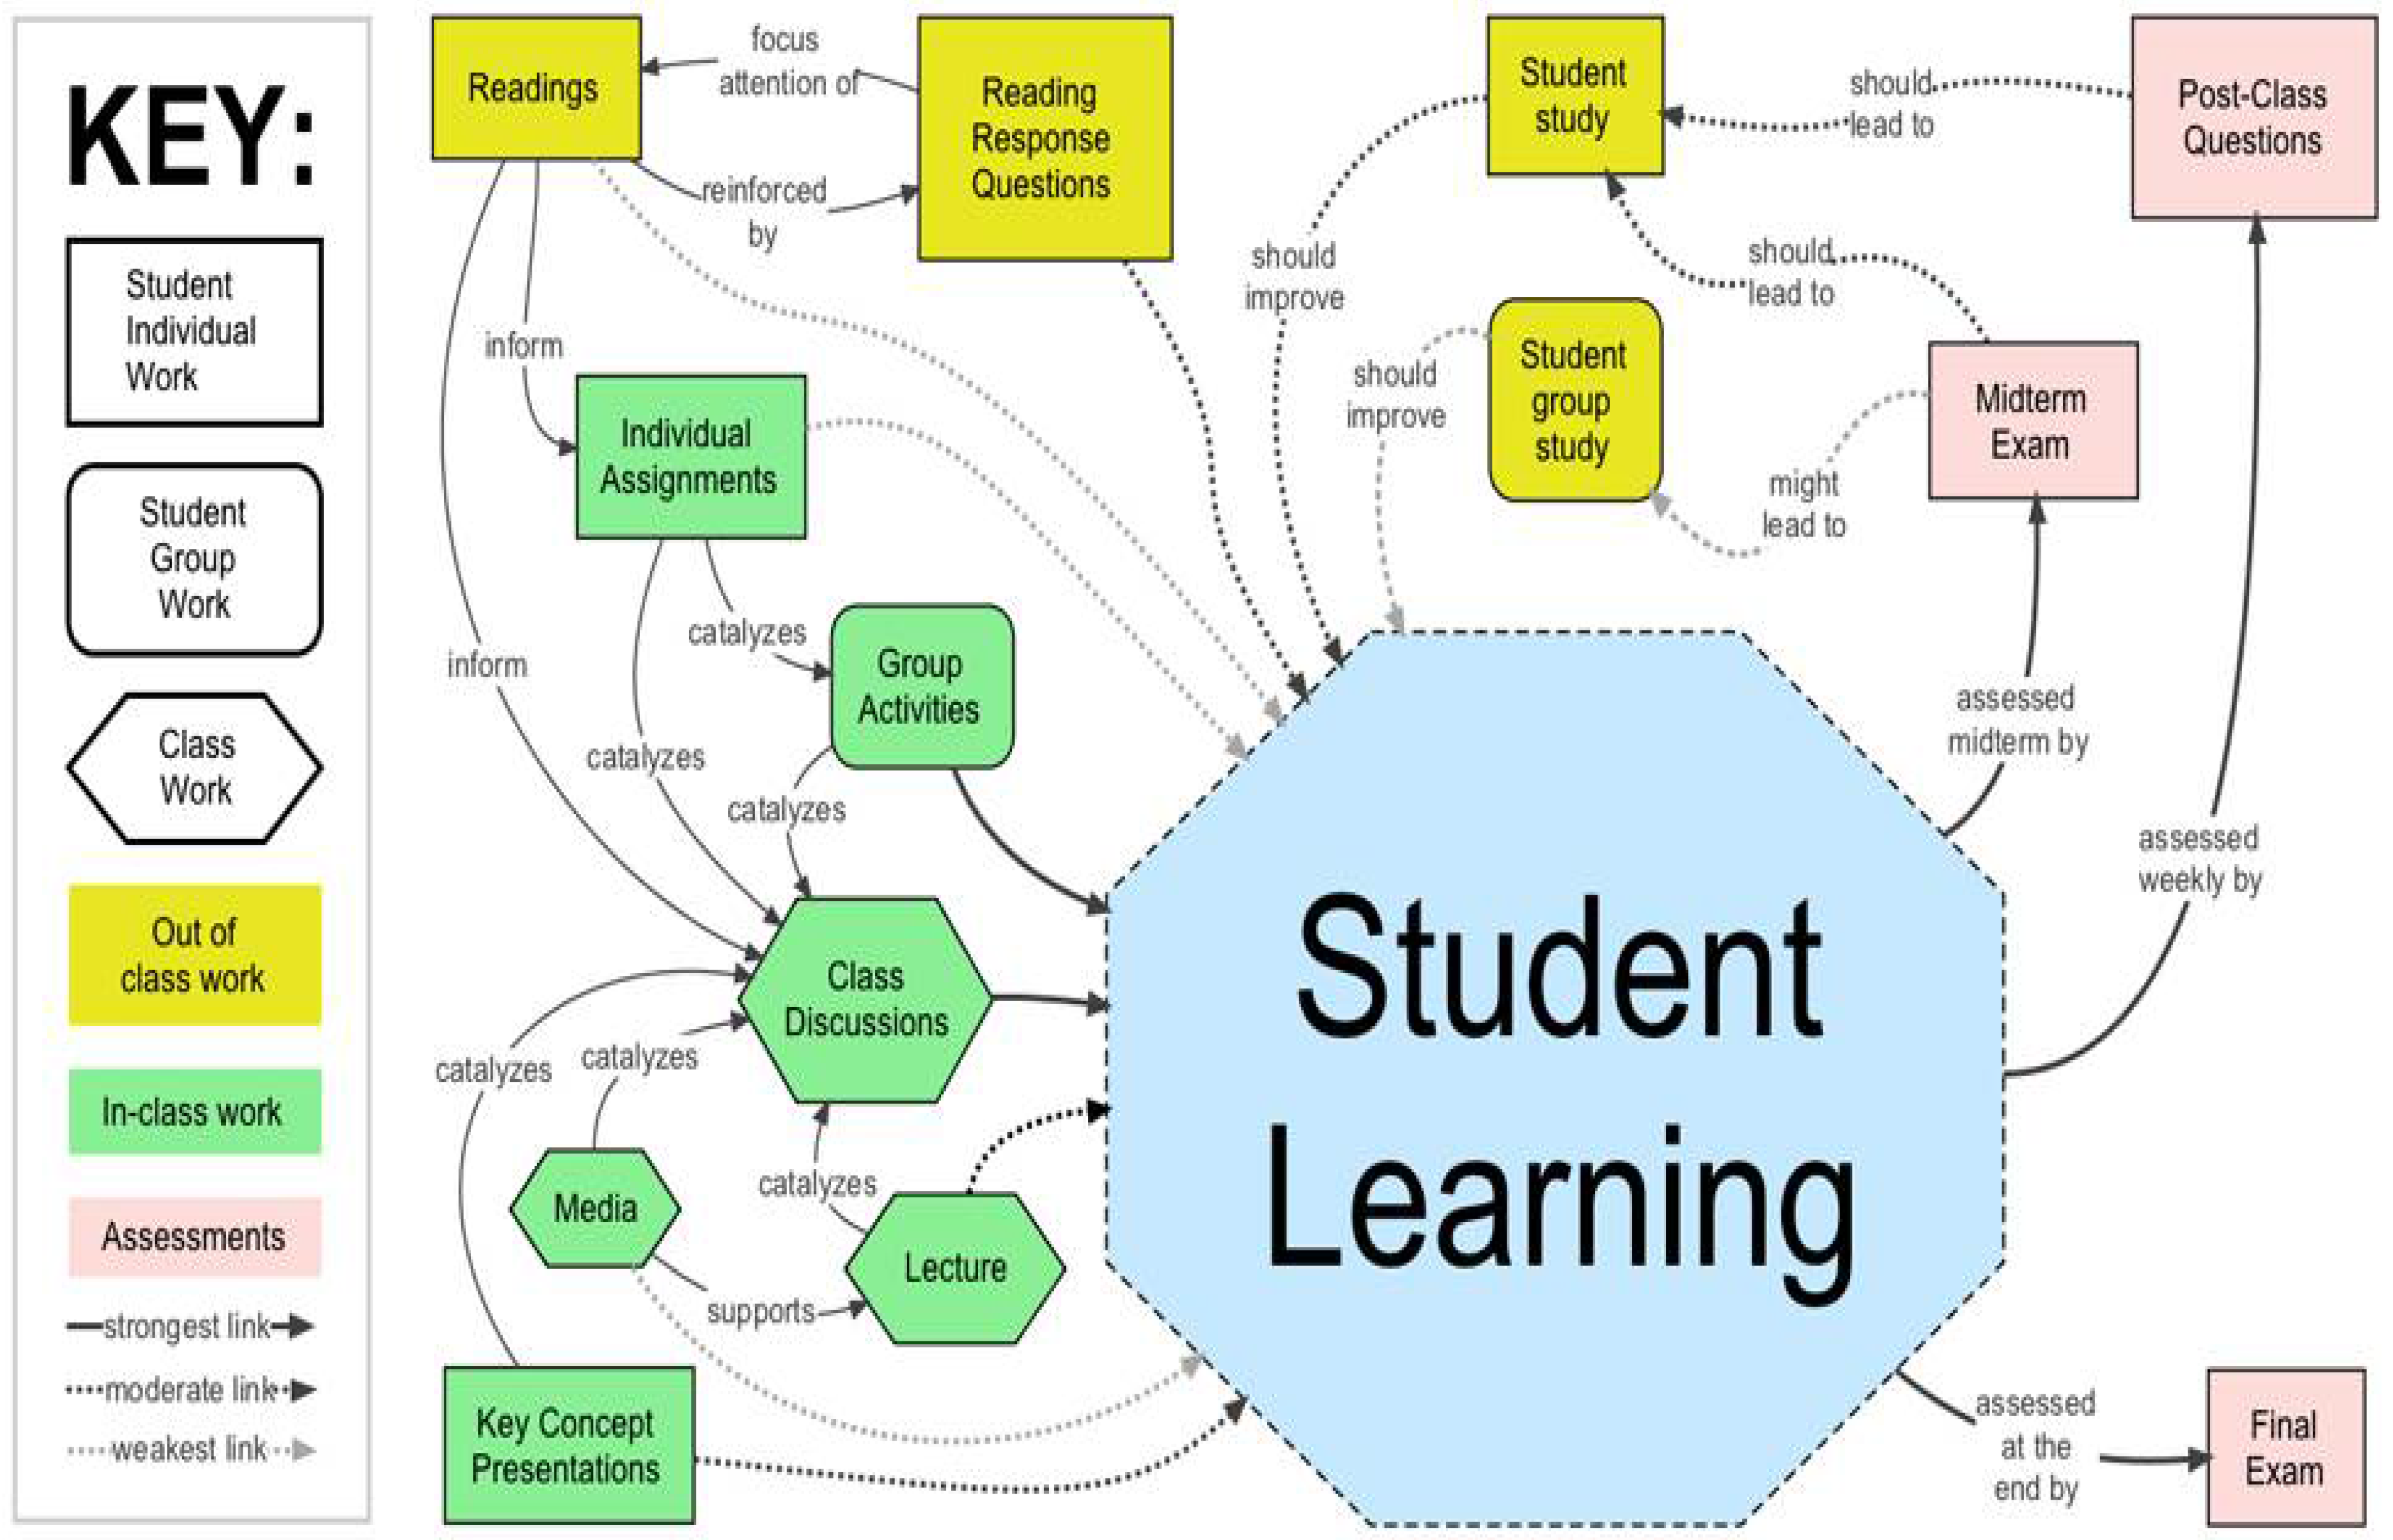 a-concept-map-can-help-in-understanding-difficult-material-by-alexandriagrotownsend